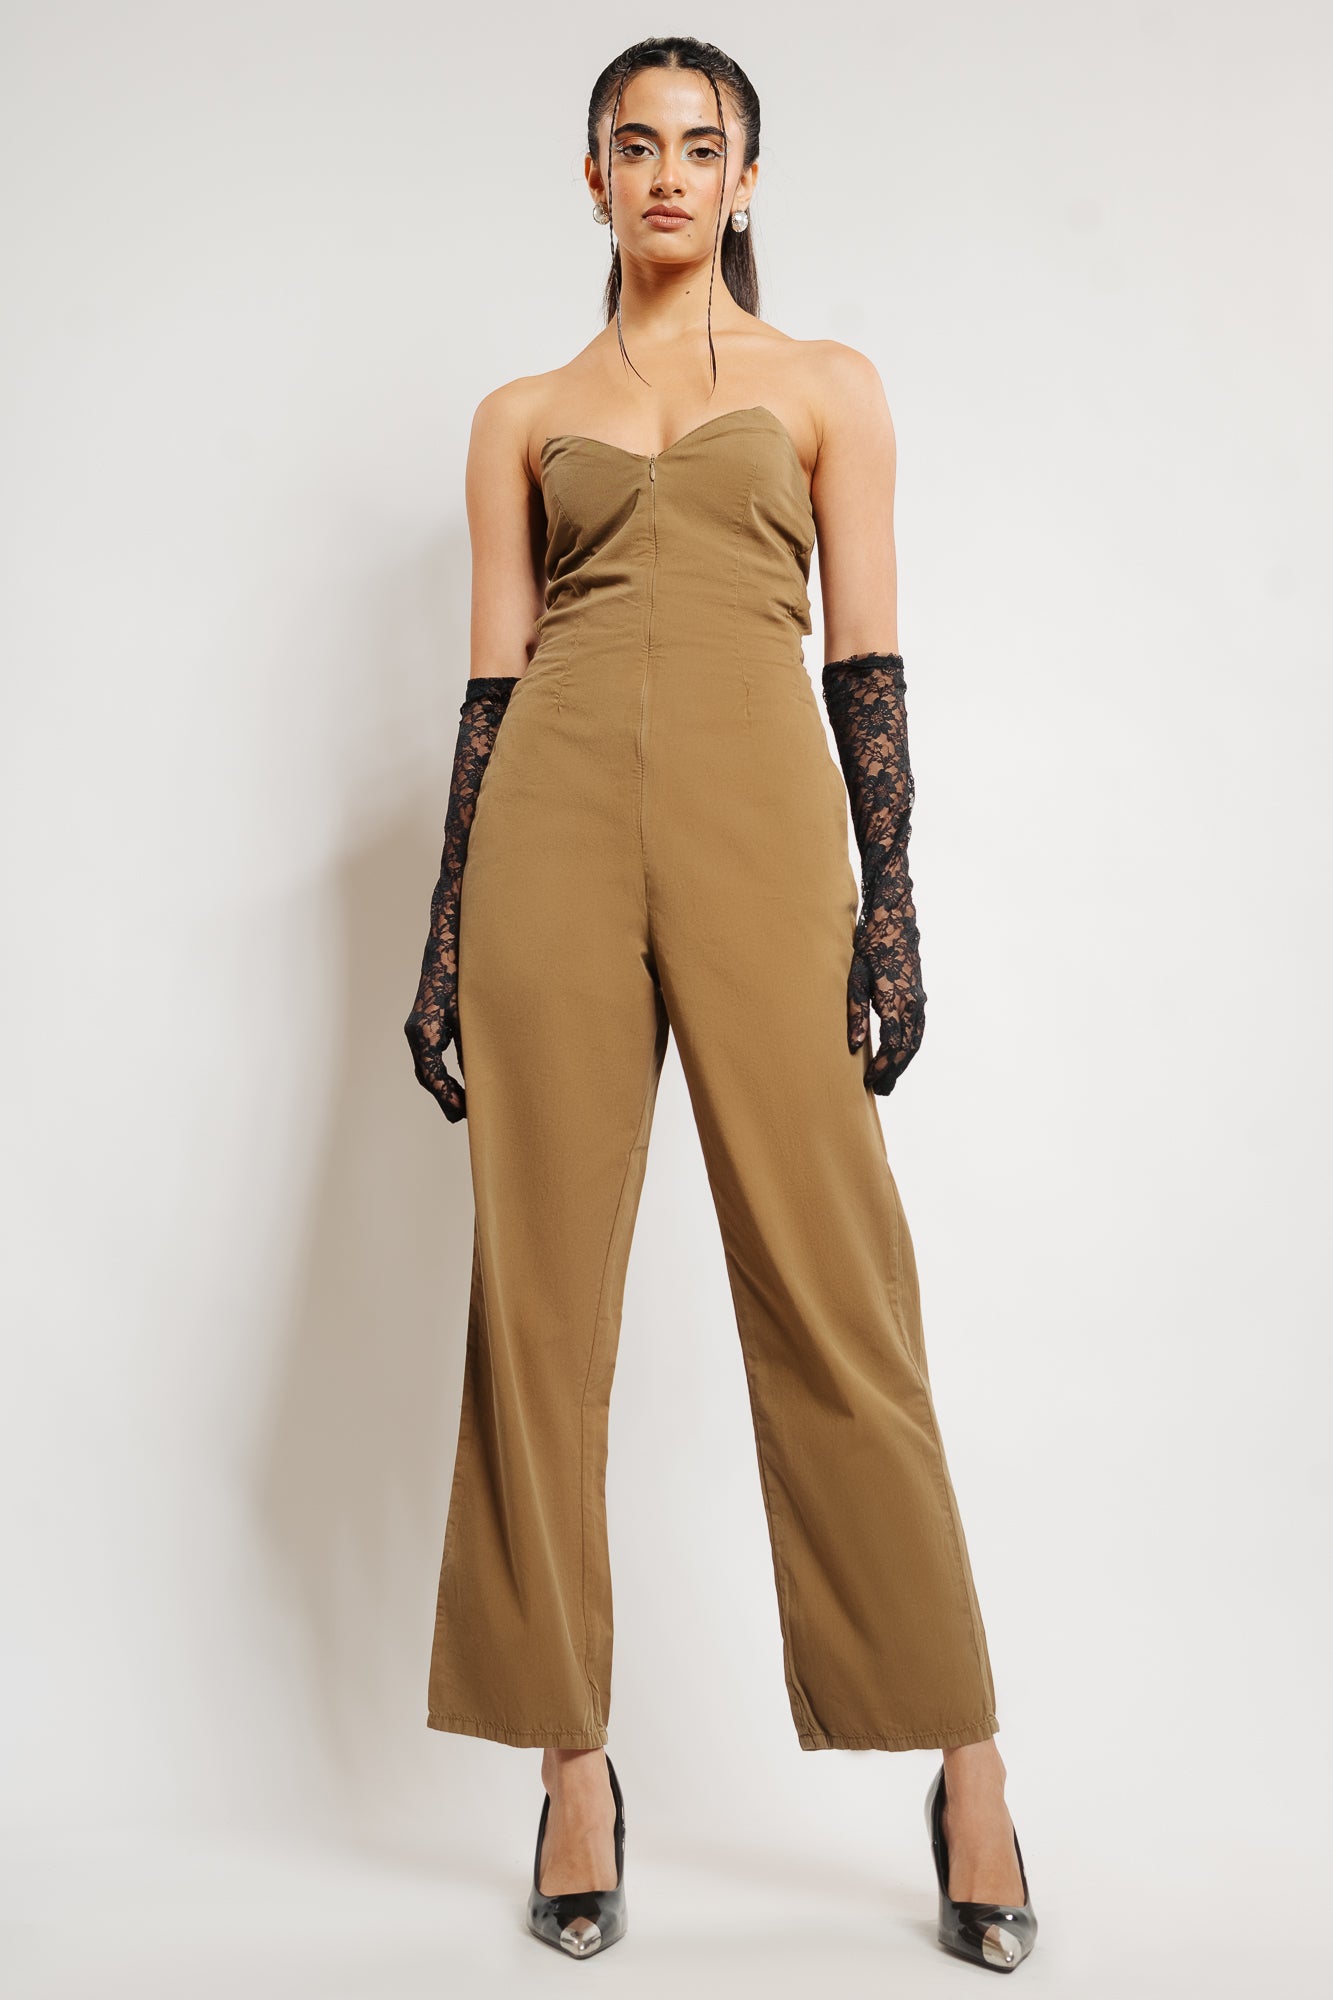 OLIVE BROWN JUMPSUITS